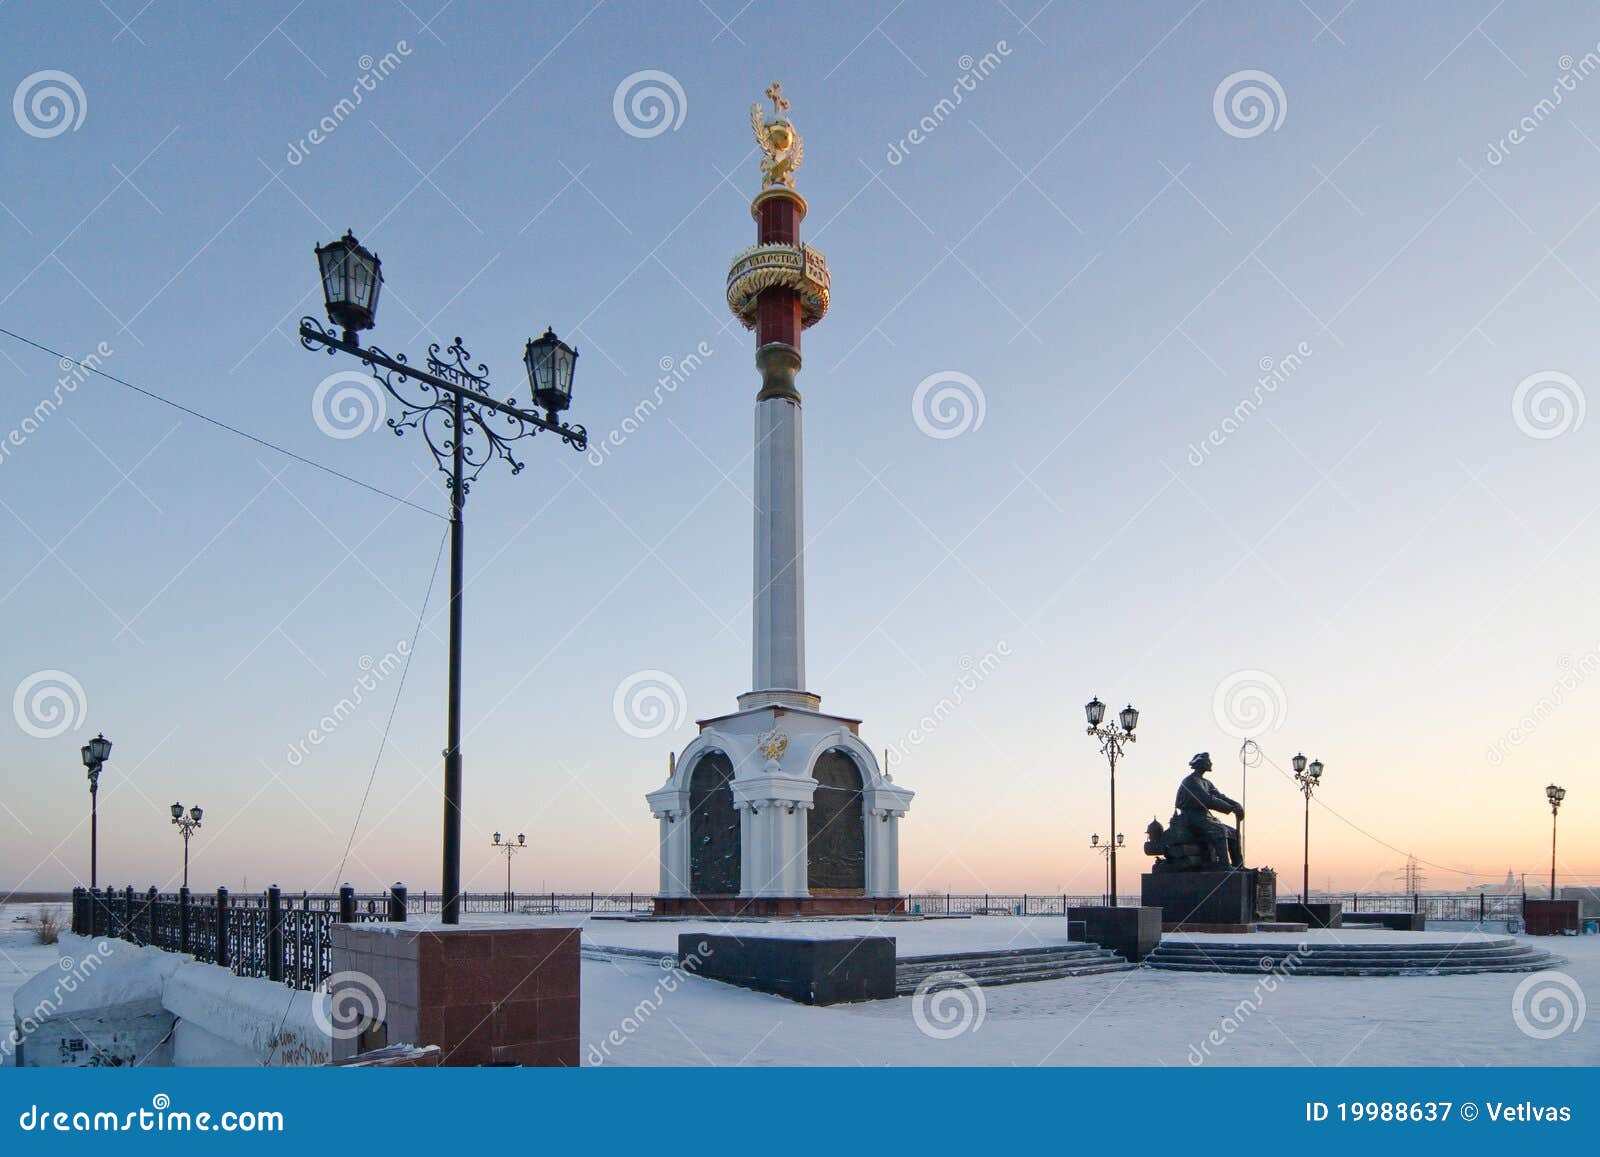 stele and a monument in yakutsk